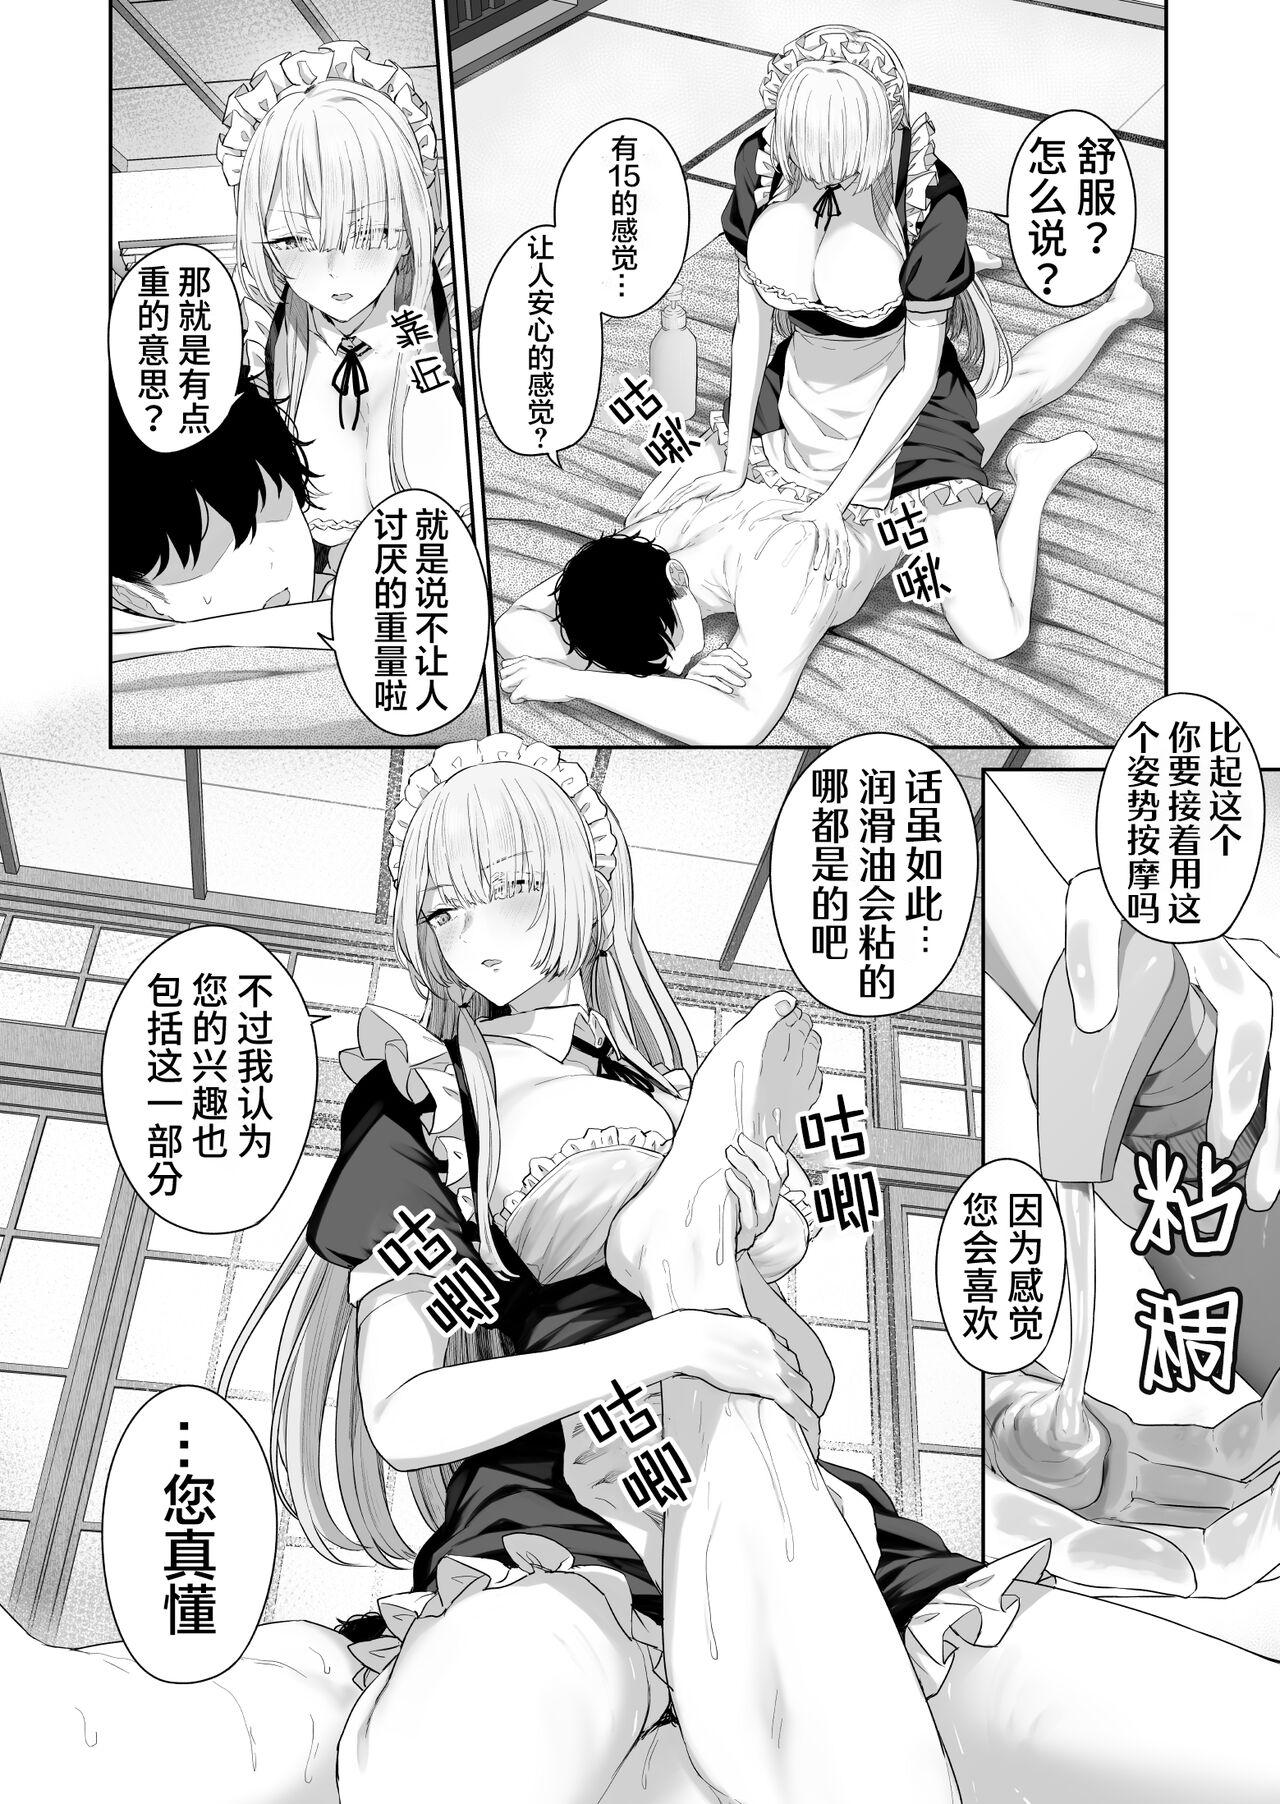 Price AK15の進捗1 - Girls frontline Massages - Page 5